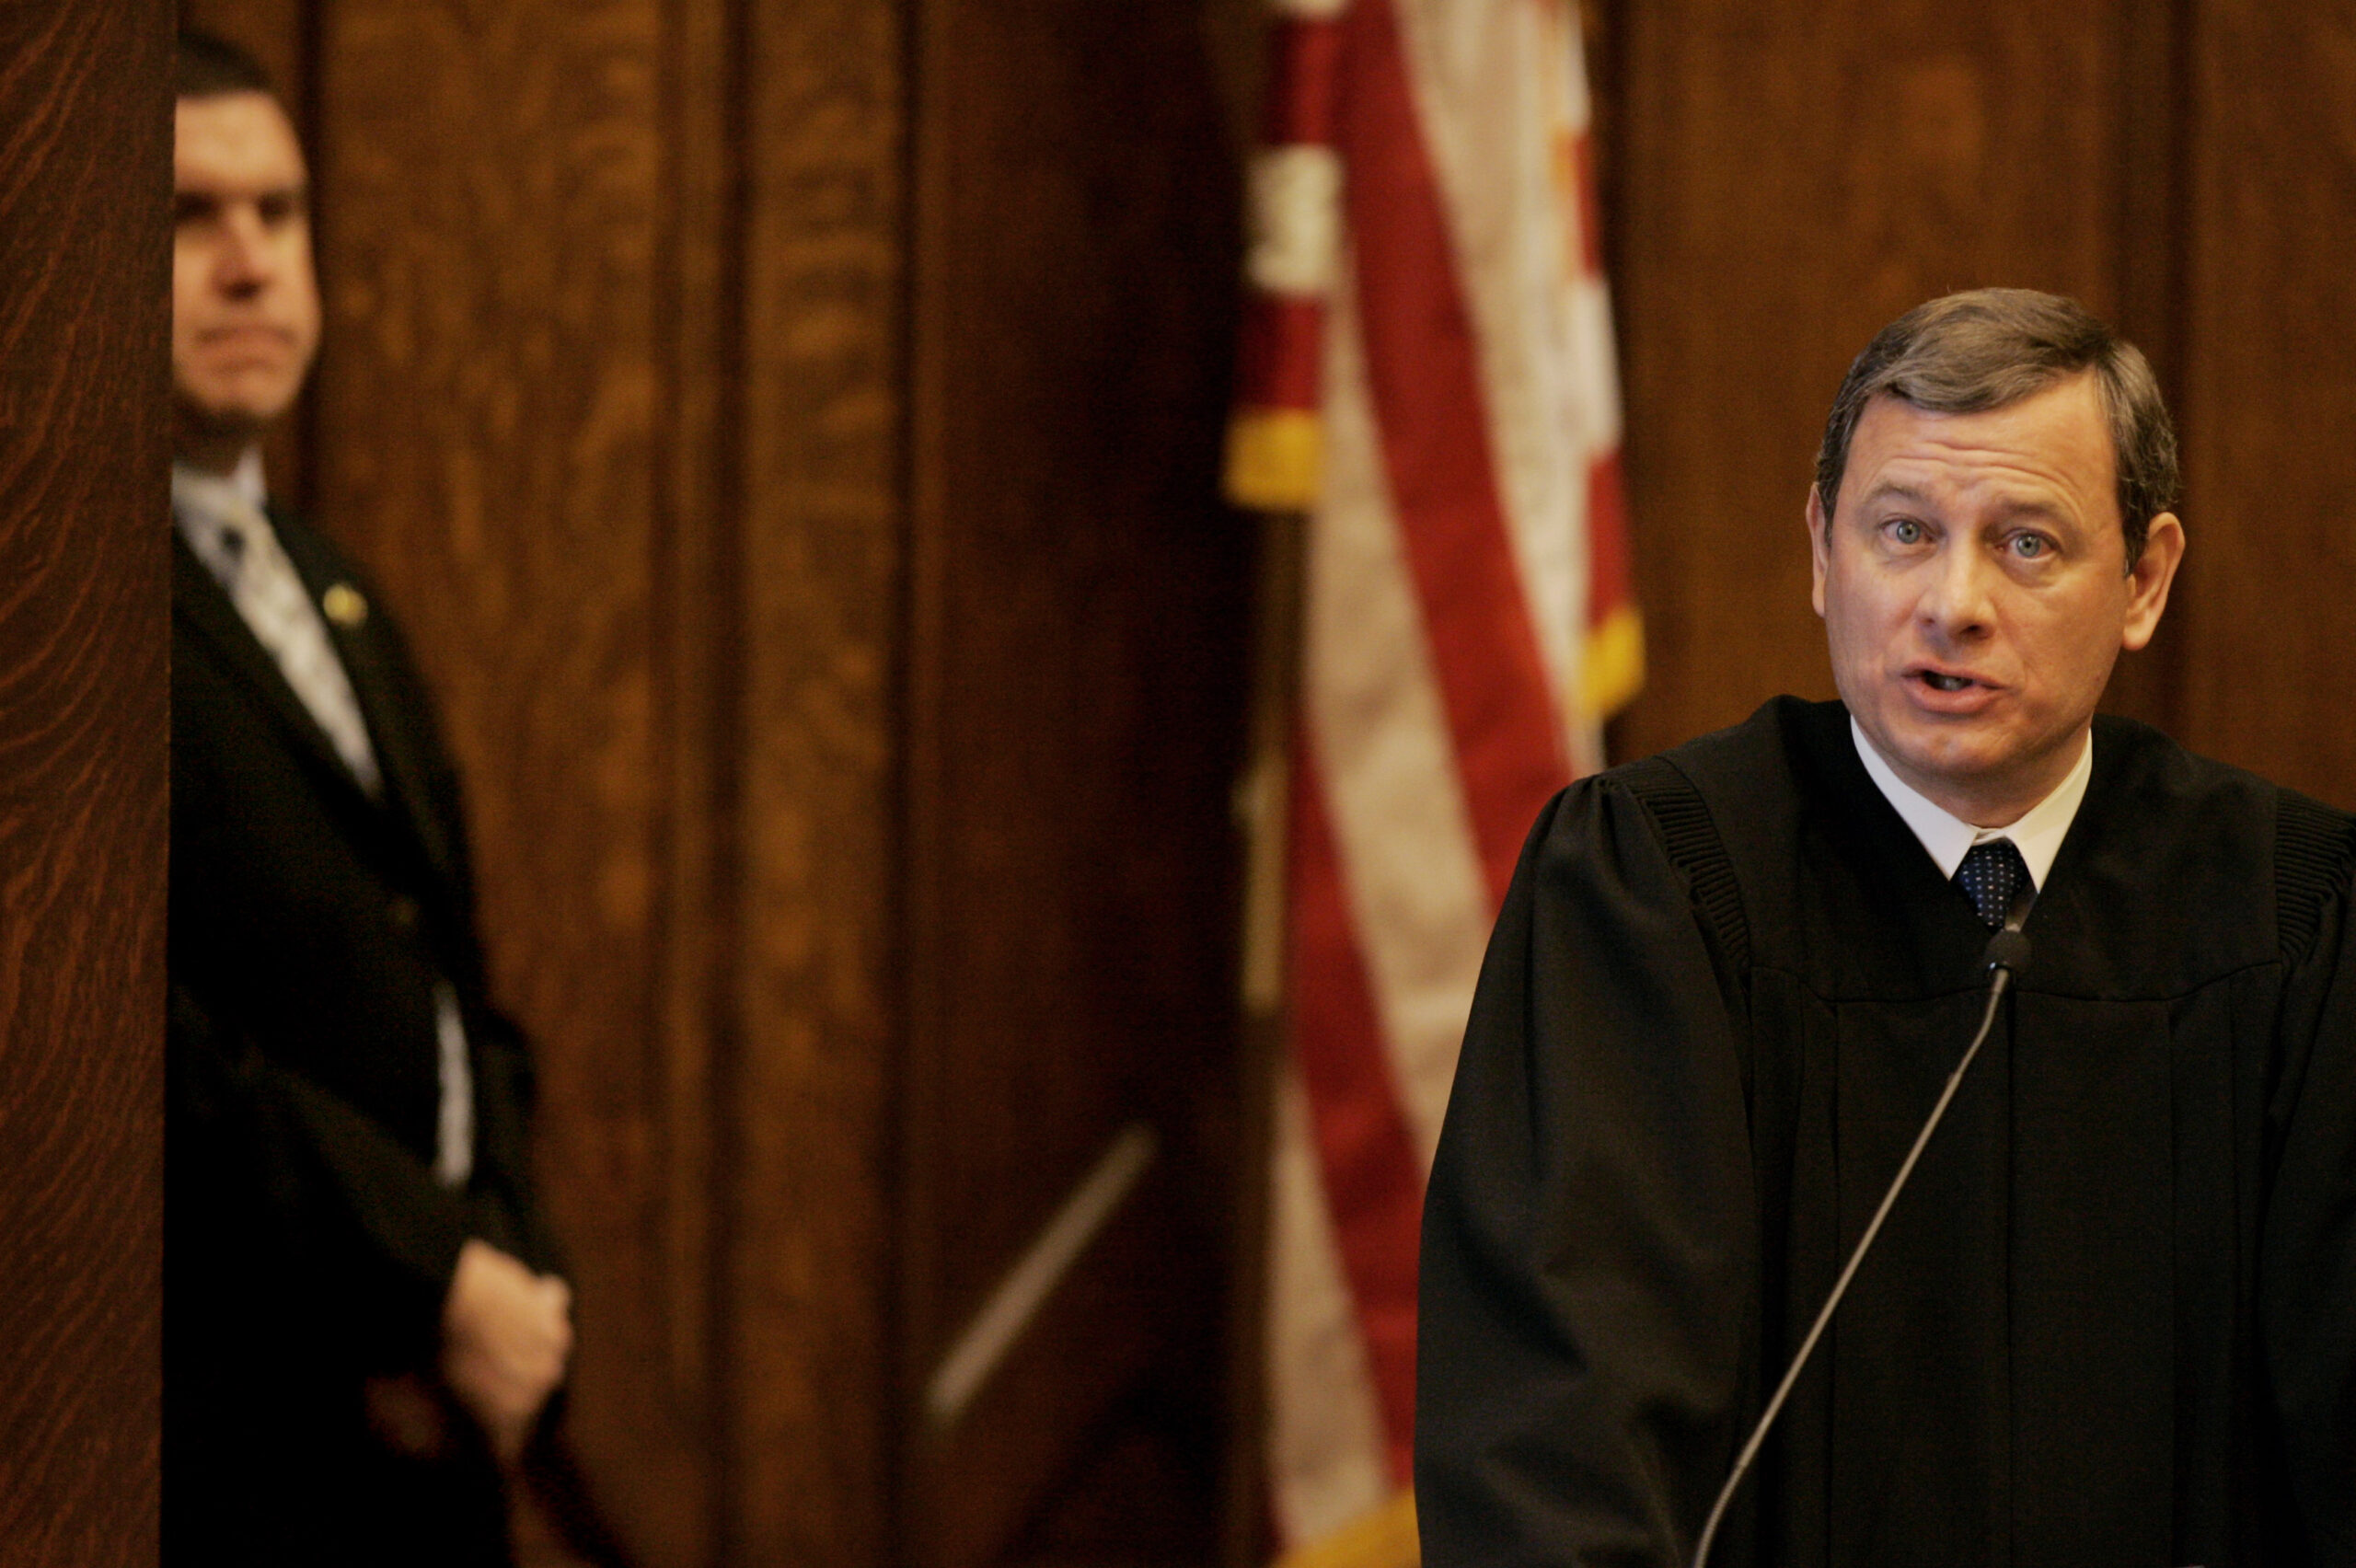 U.S. Supreme Court Chief Justice John G. Roberts, Jr., makes remarks at the opening celebration of the Centennial of the U.S. Courthouse in Providence, RI., as a member of his security team looks on Tuesday morning, Feb. 12, 2008. (AP Photo/Stephan Savoia)